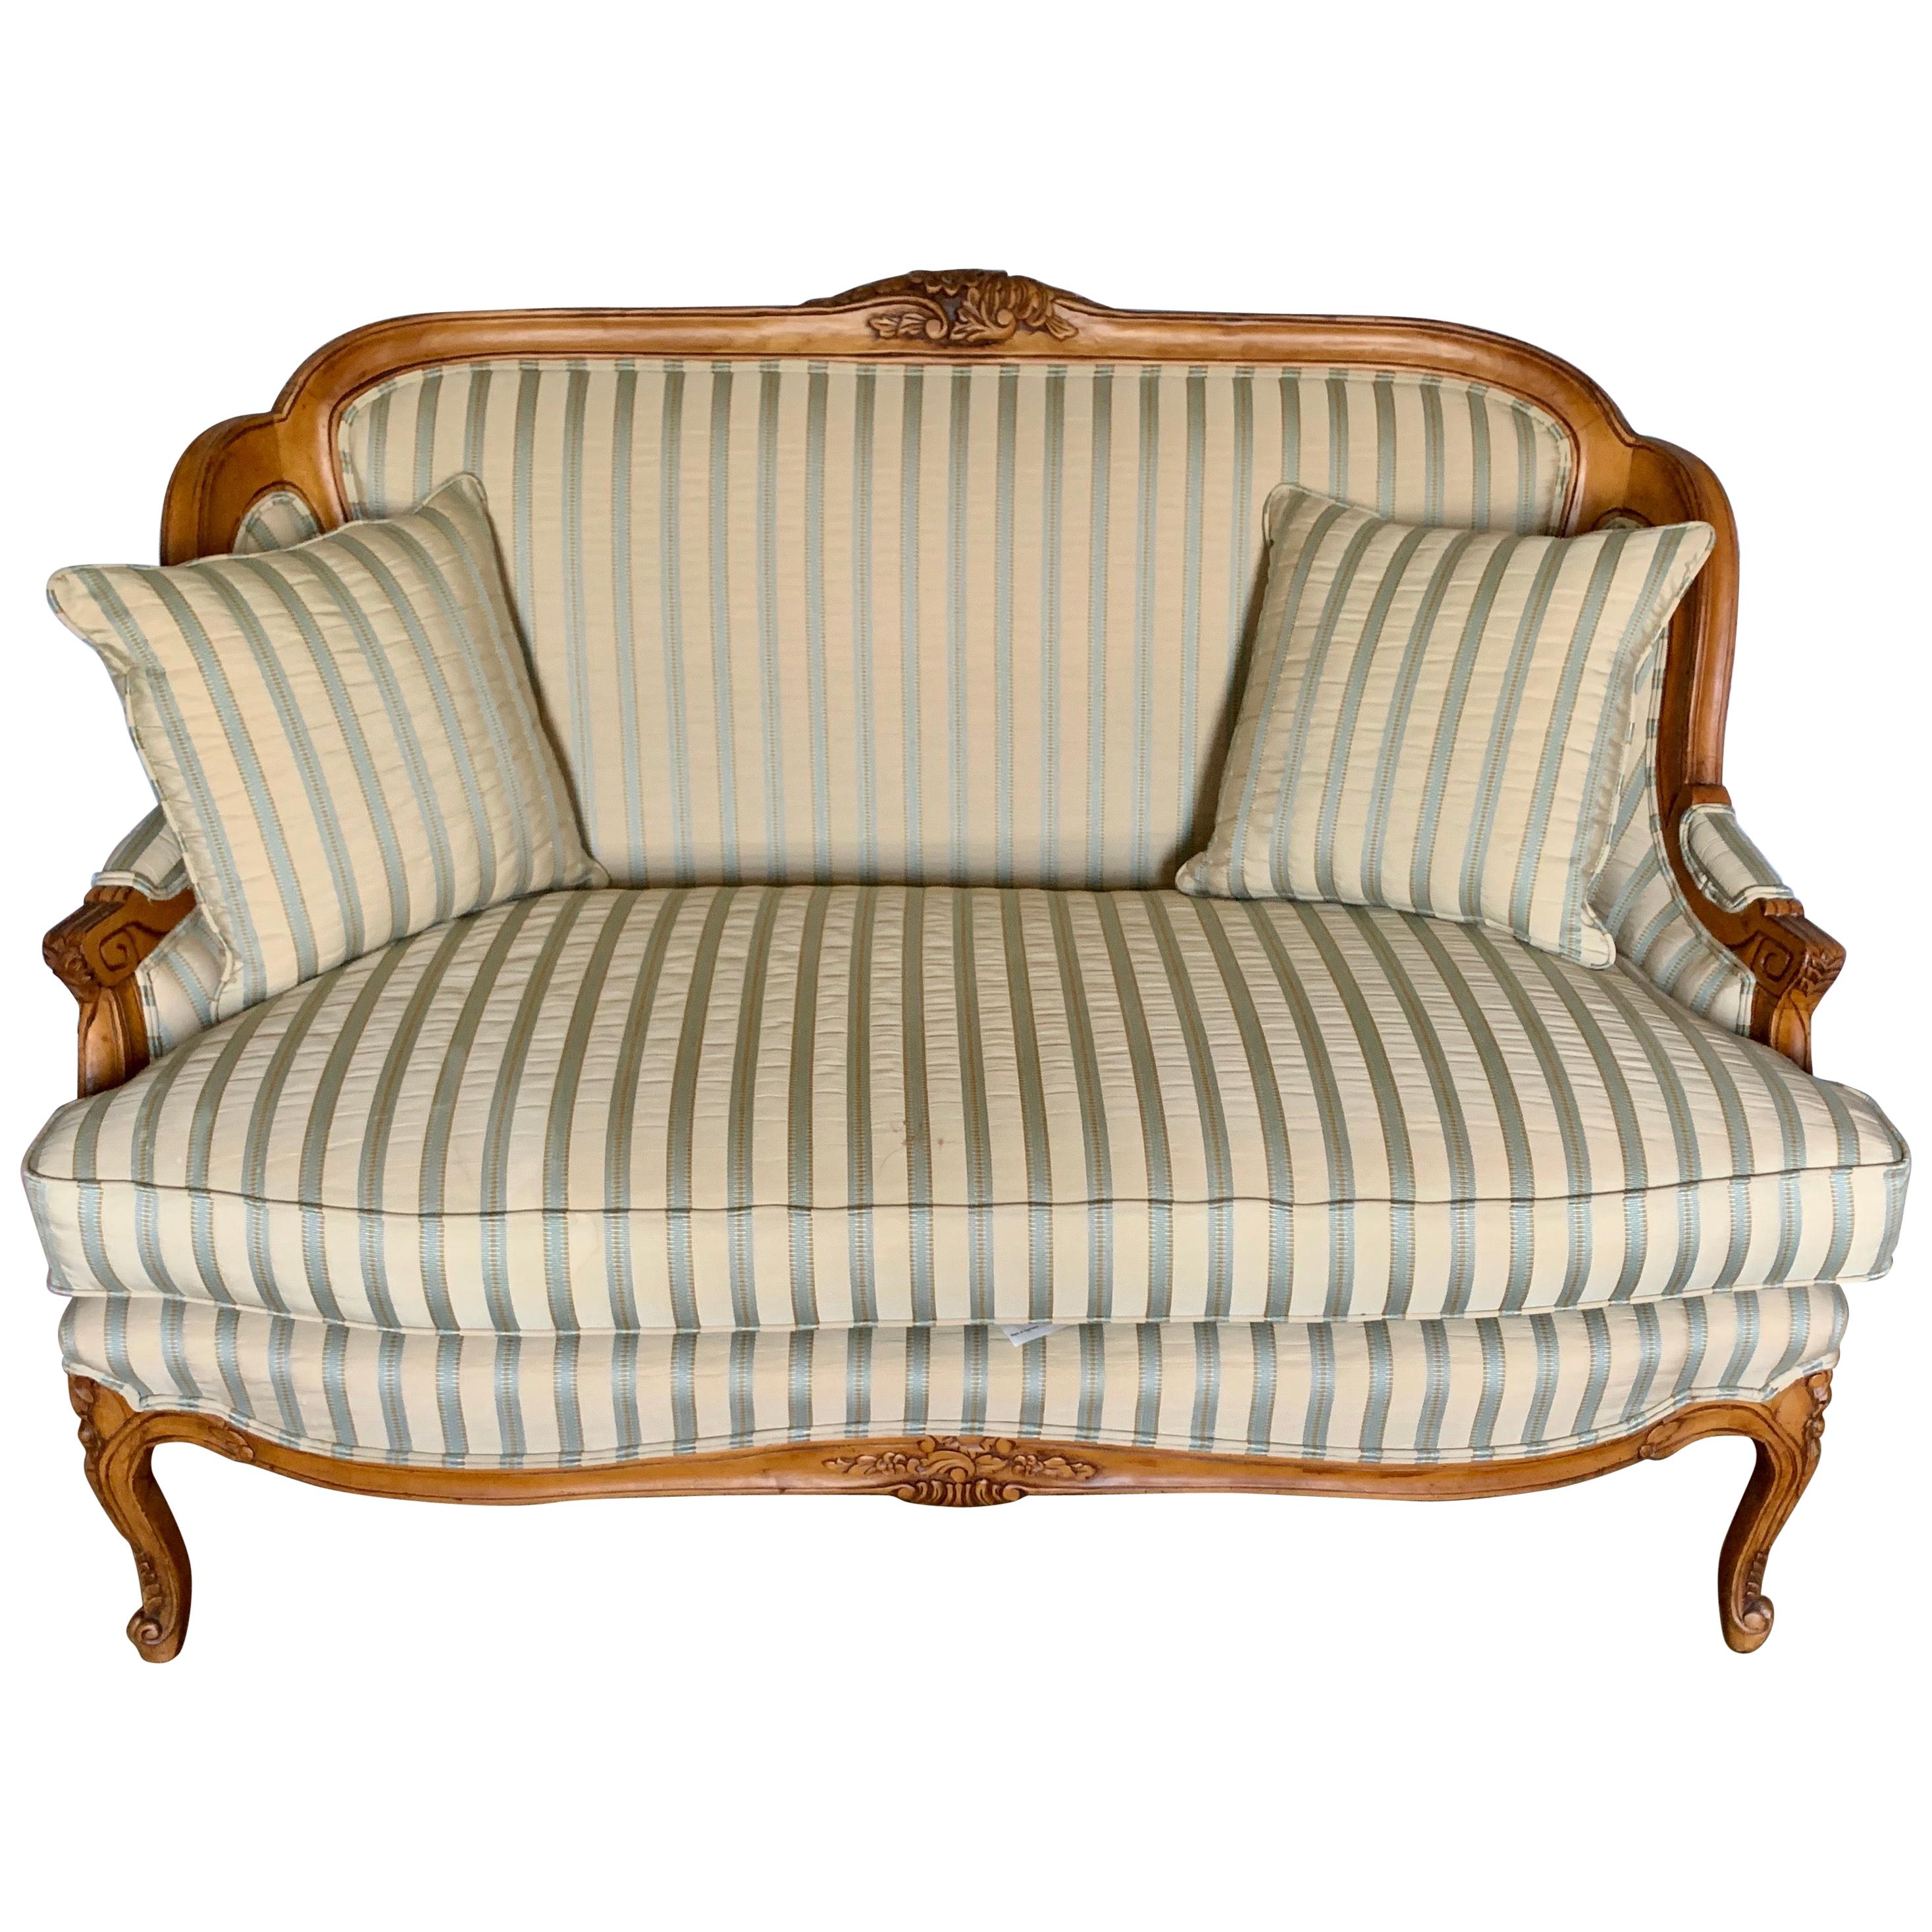 French Louis XVI Style Carved Settee Loveseat with Silk Striped Upholstery